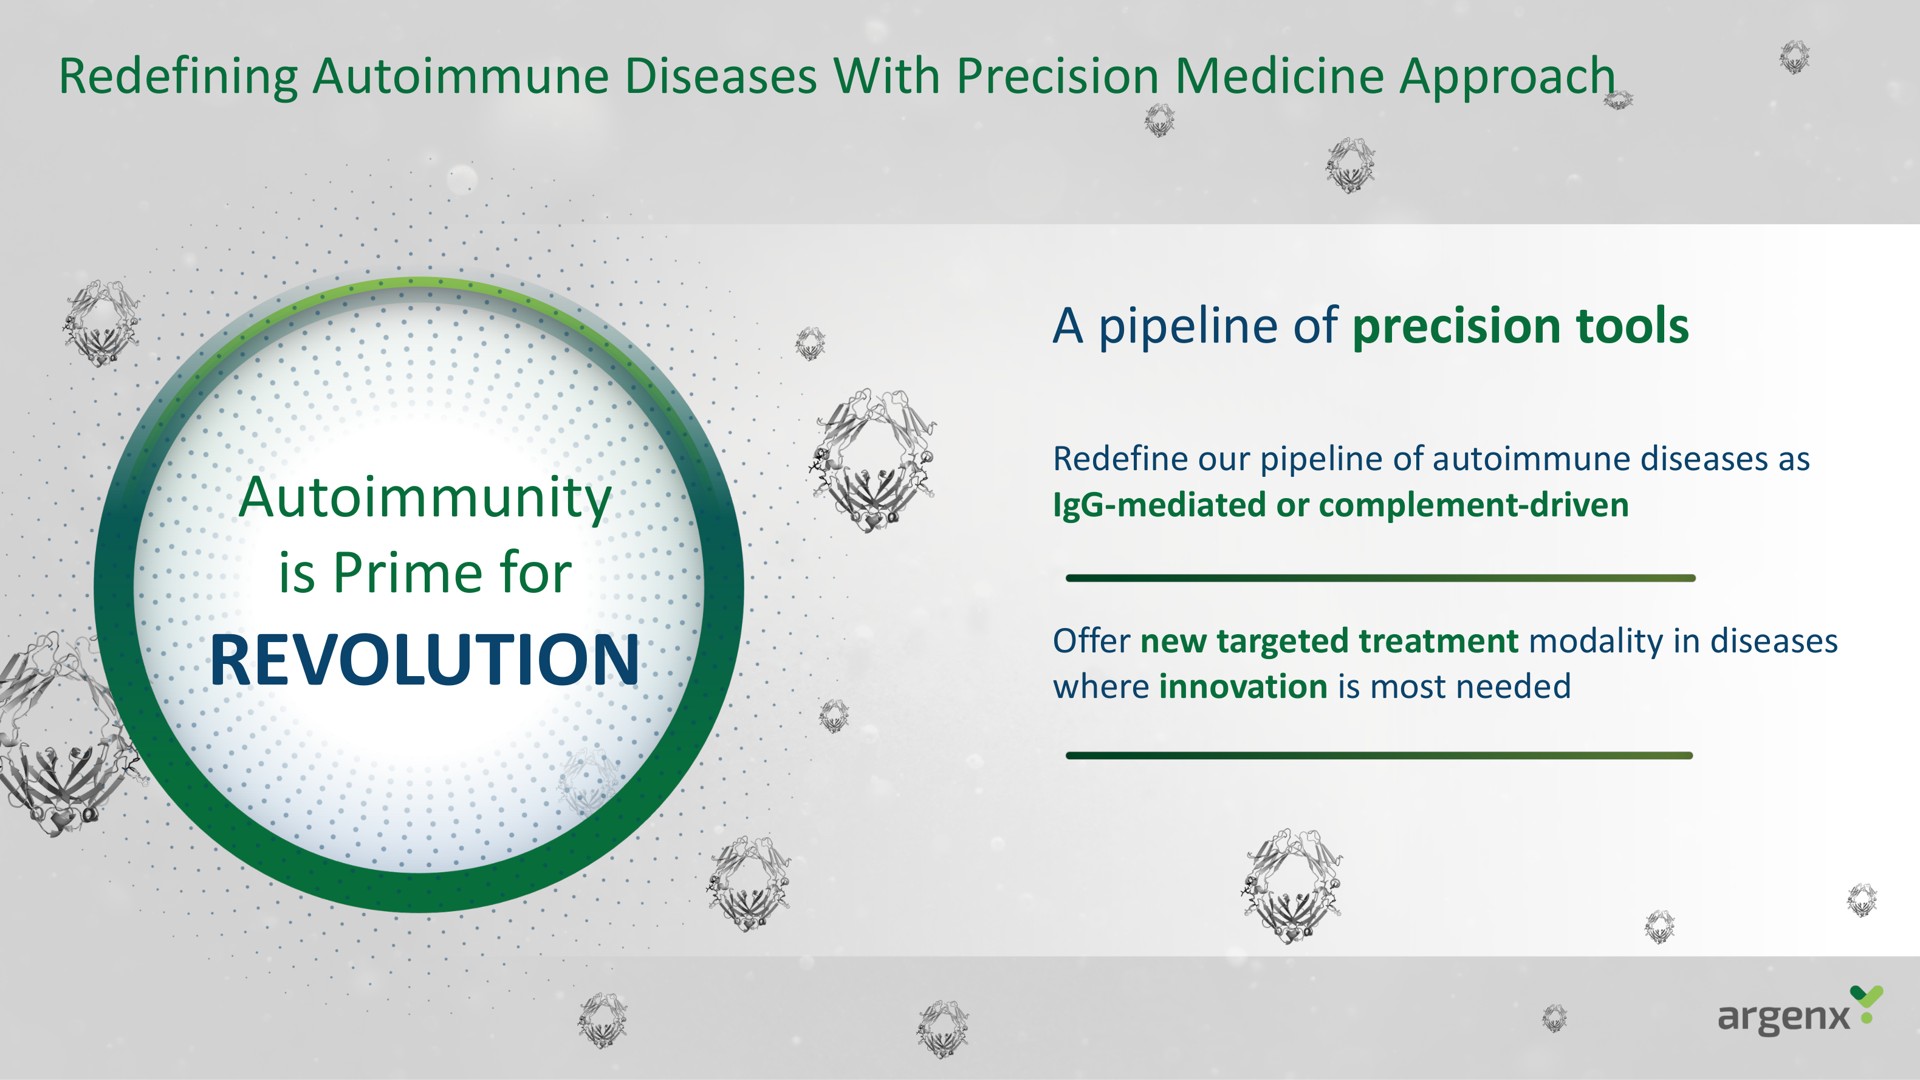 redefining diseases with precision medicine approach autoimmunity is prime for revolution a pipeline of precision tools | argenx SE